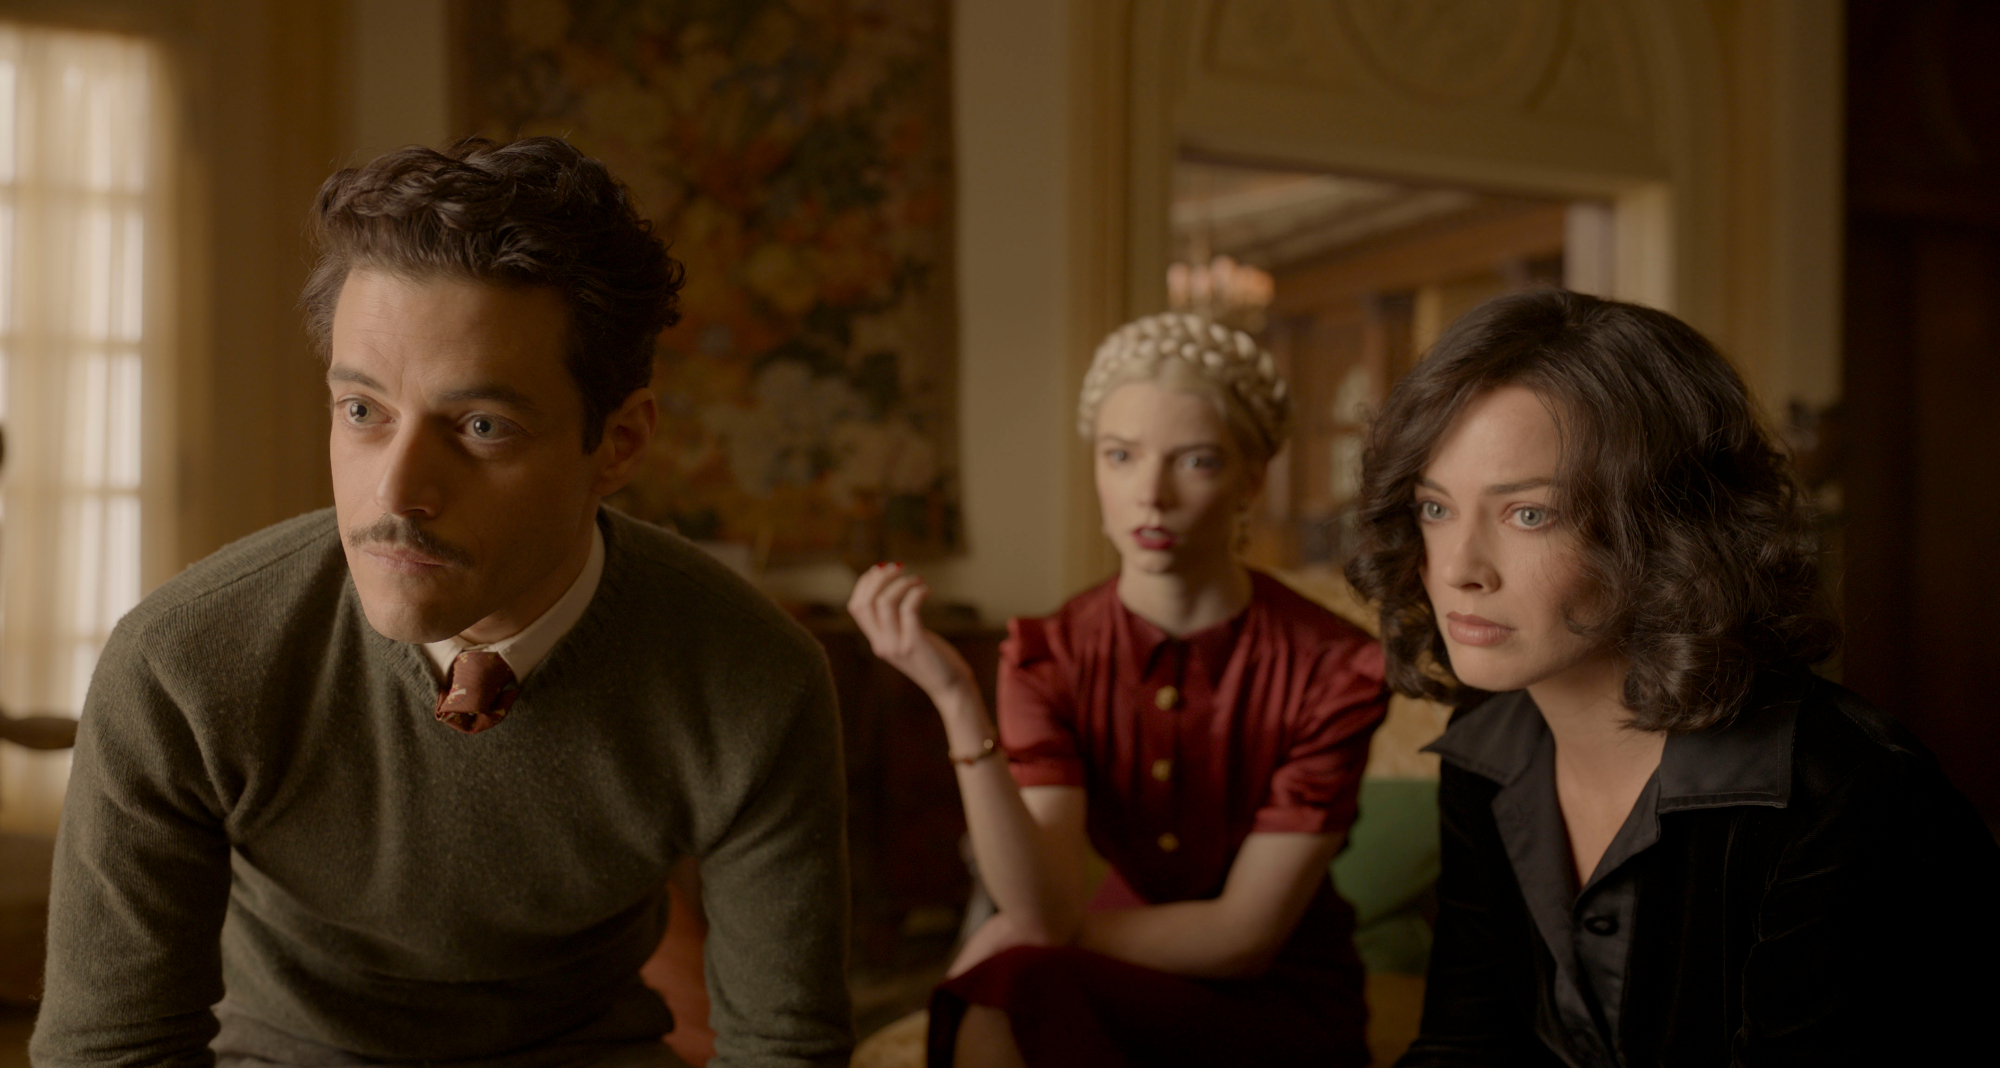 'Amsterdam' Rami Malek as Tom Voze, Anya Taylor-Joy as Libby Voze, and Margot Robbie as Valerie Voze all looking slightly concerned wearing 1930s clothing in gaudy living room